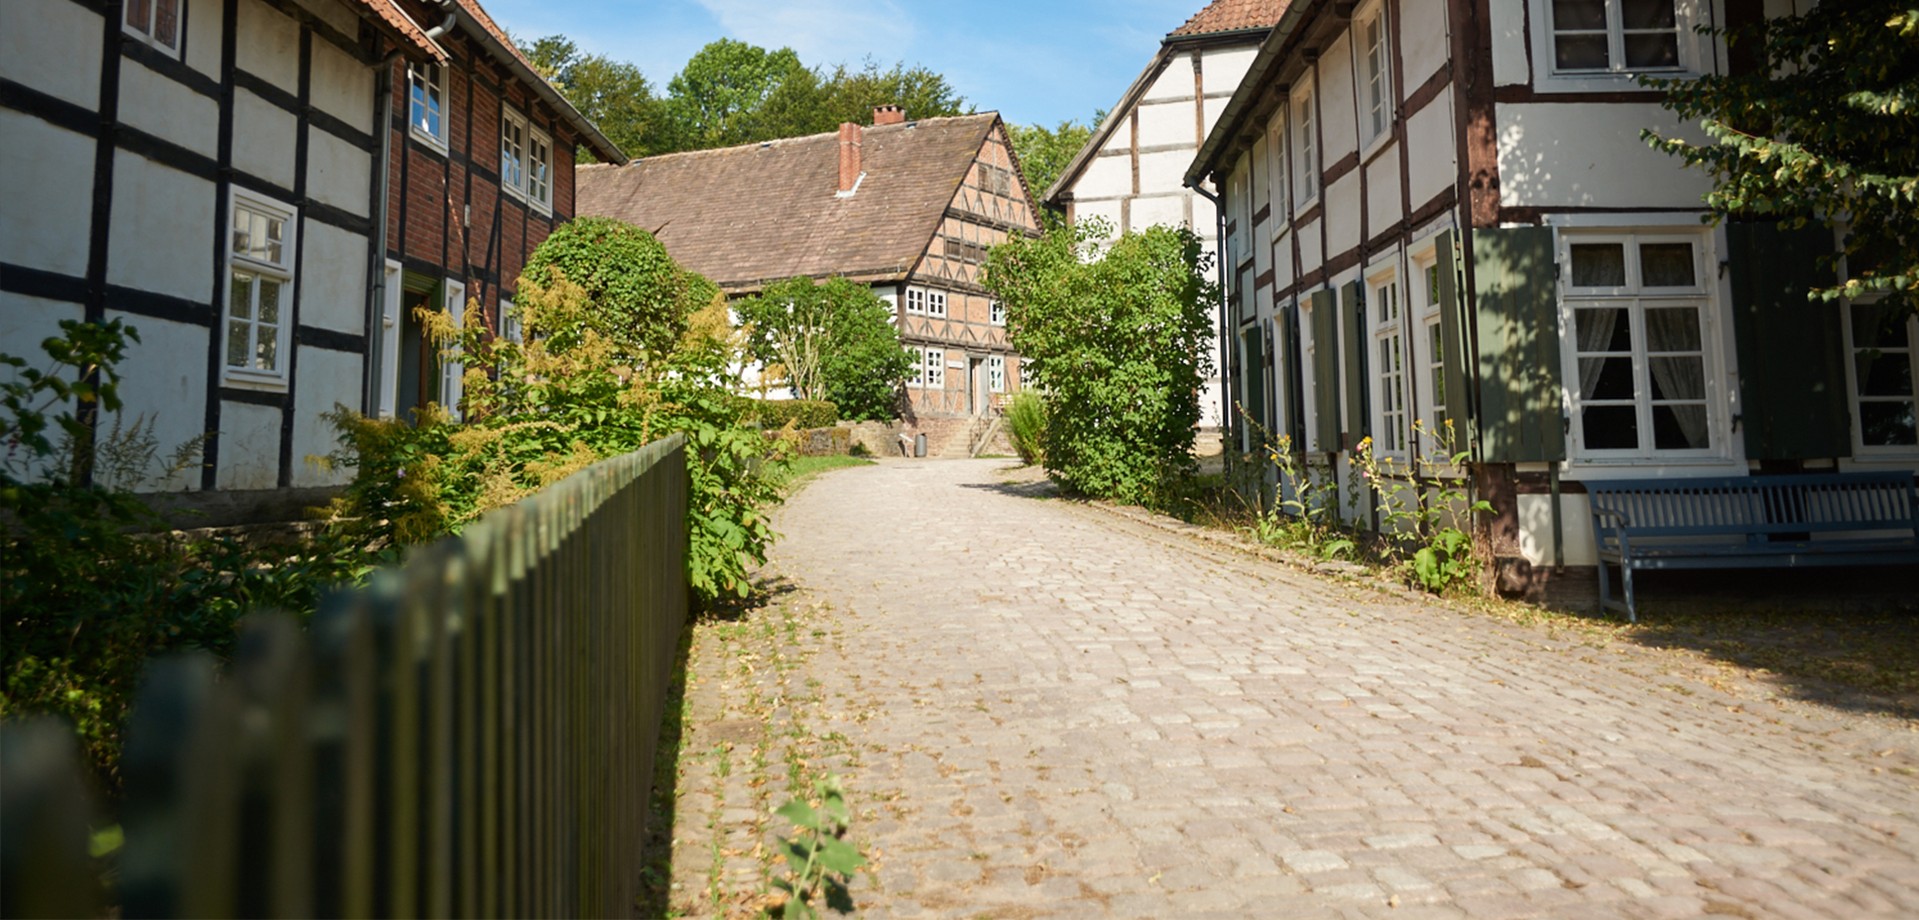 A path in the Paderborn Village between historic buildings.